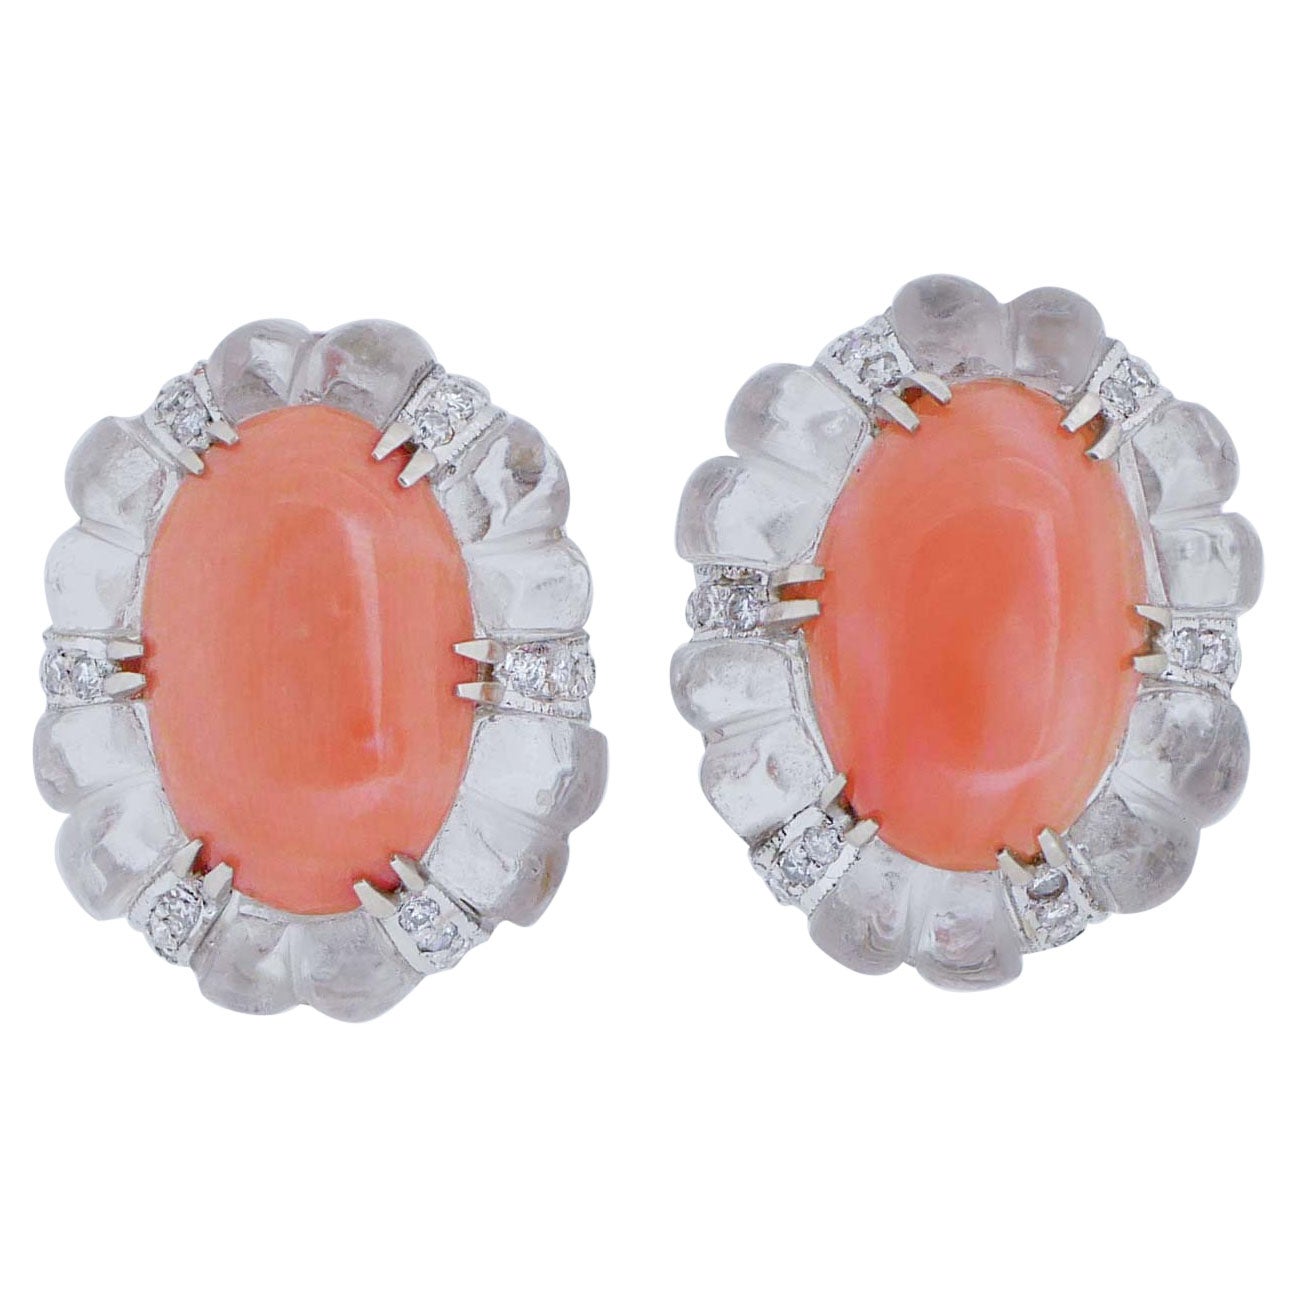 Rock Crystal, Coral, Diamonds, 14 Kt White Gold Earrings.